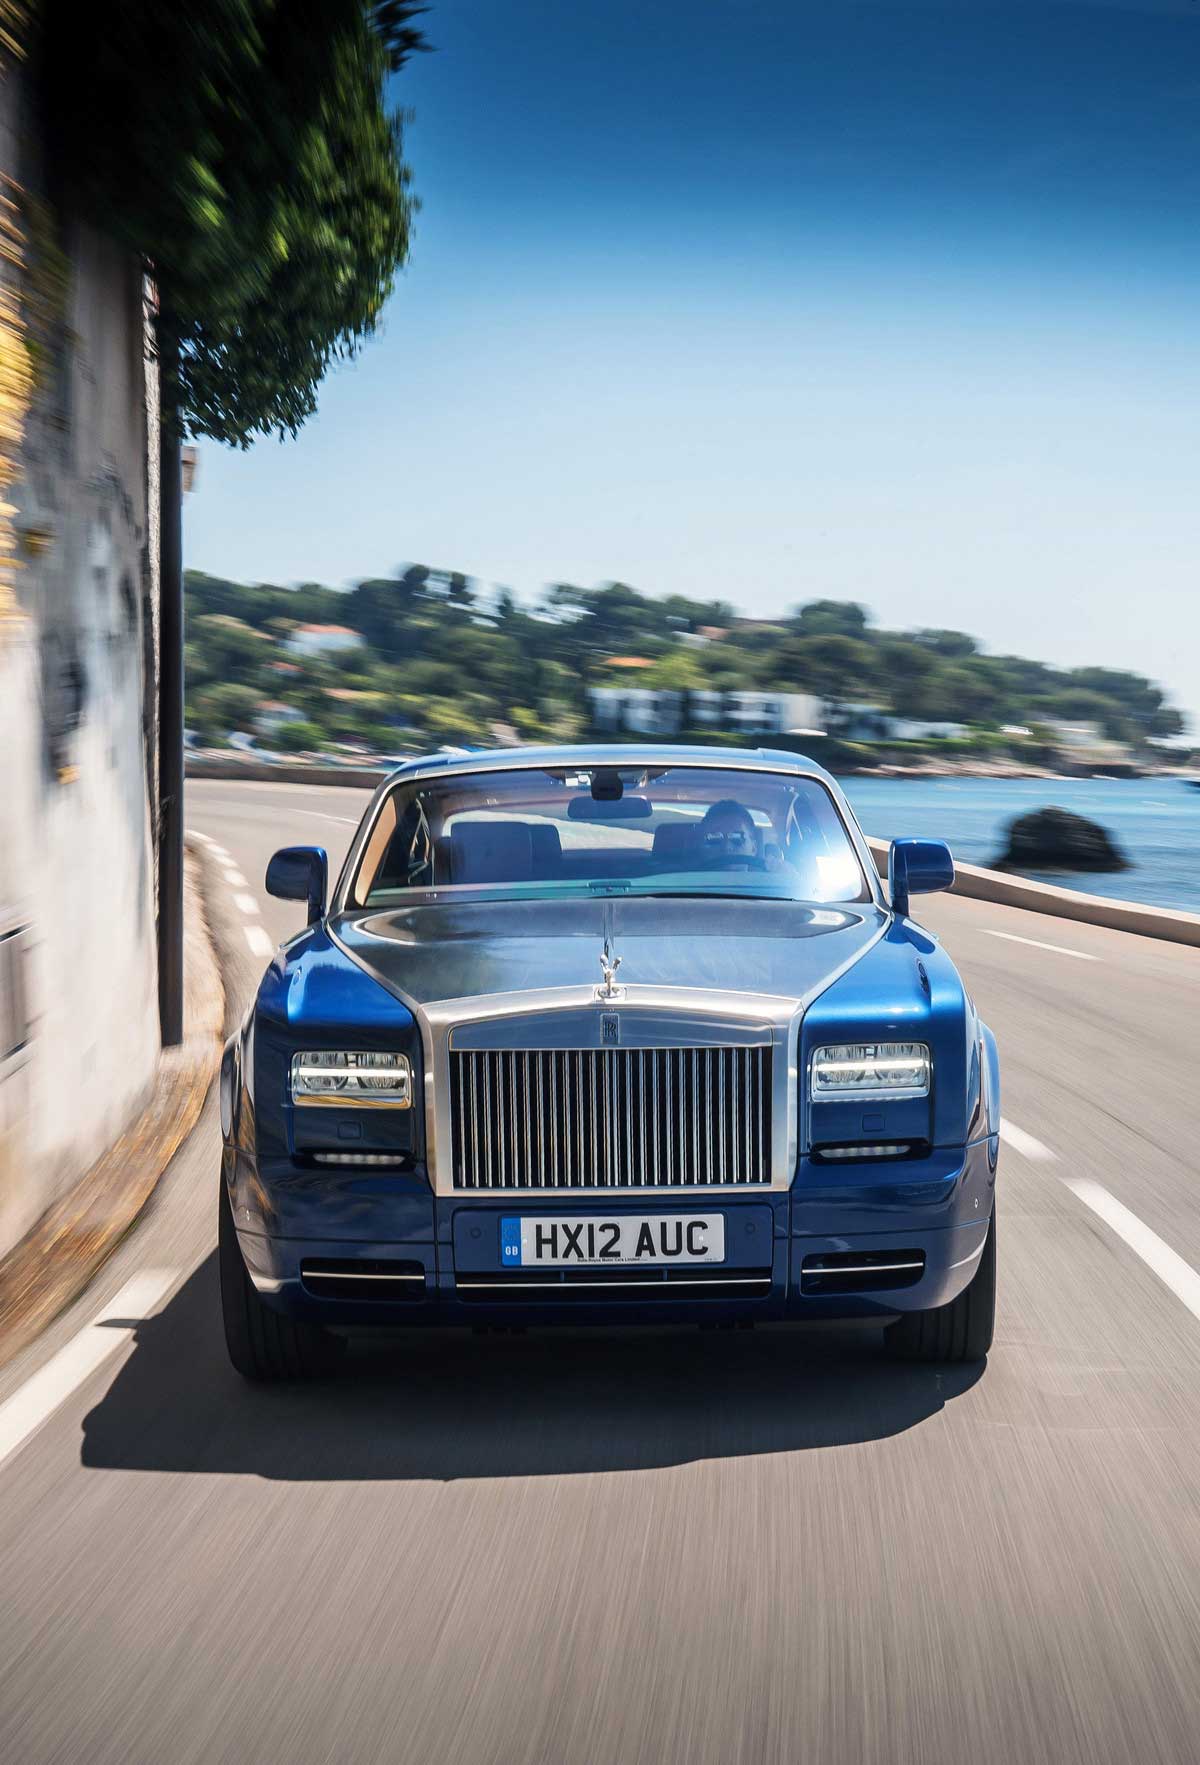 2014 Rolls Royce Phantom Coupe Exterior Front View